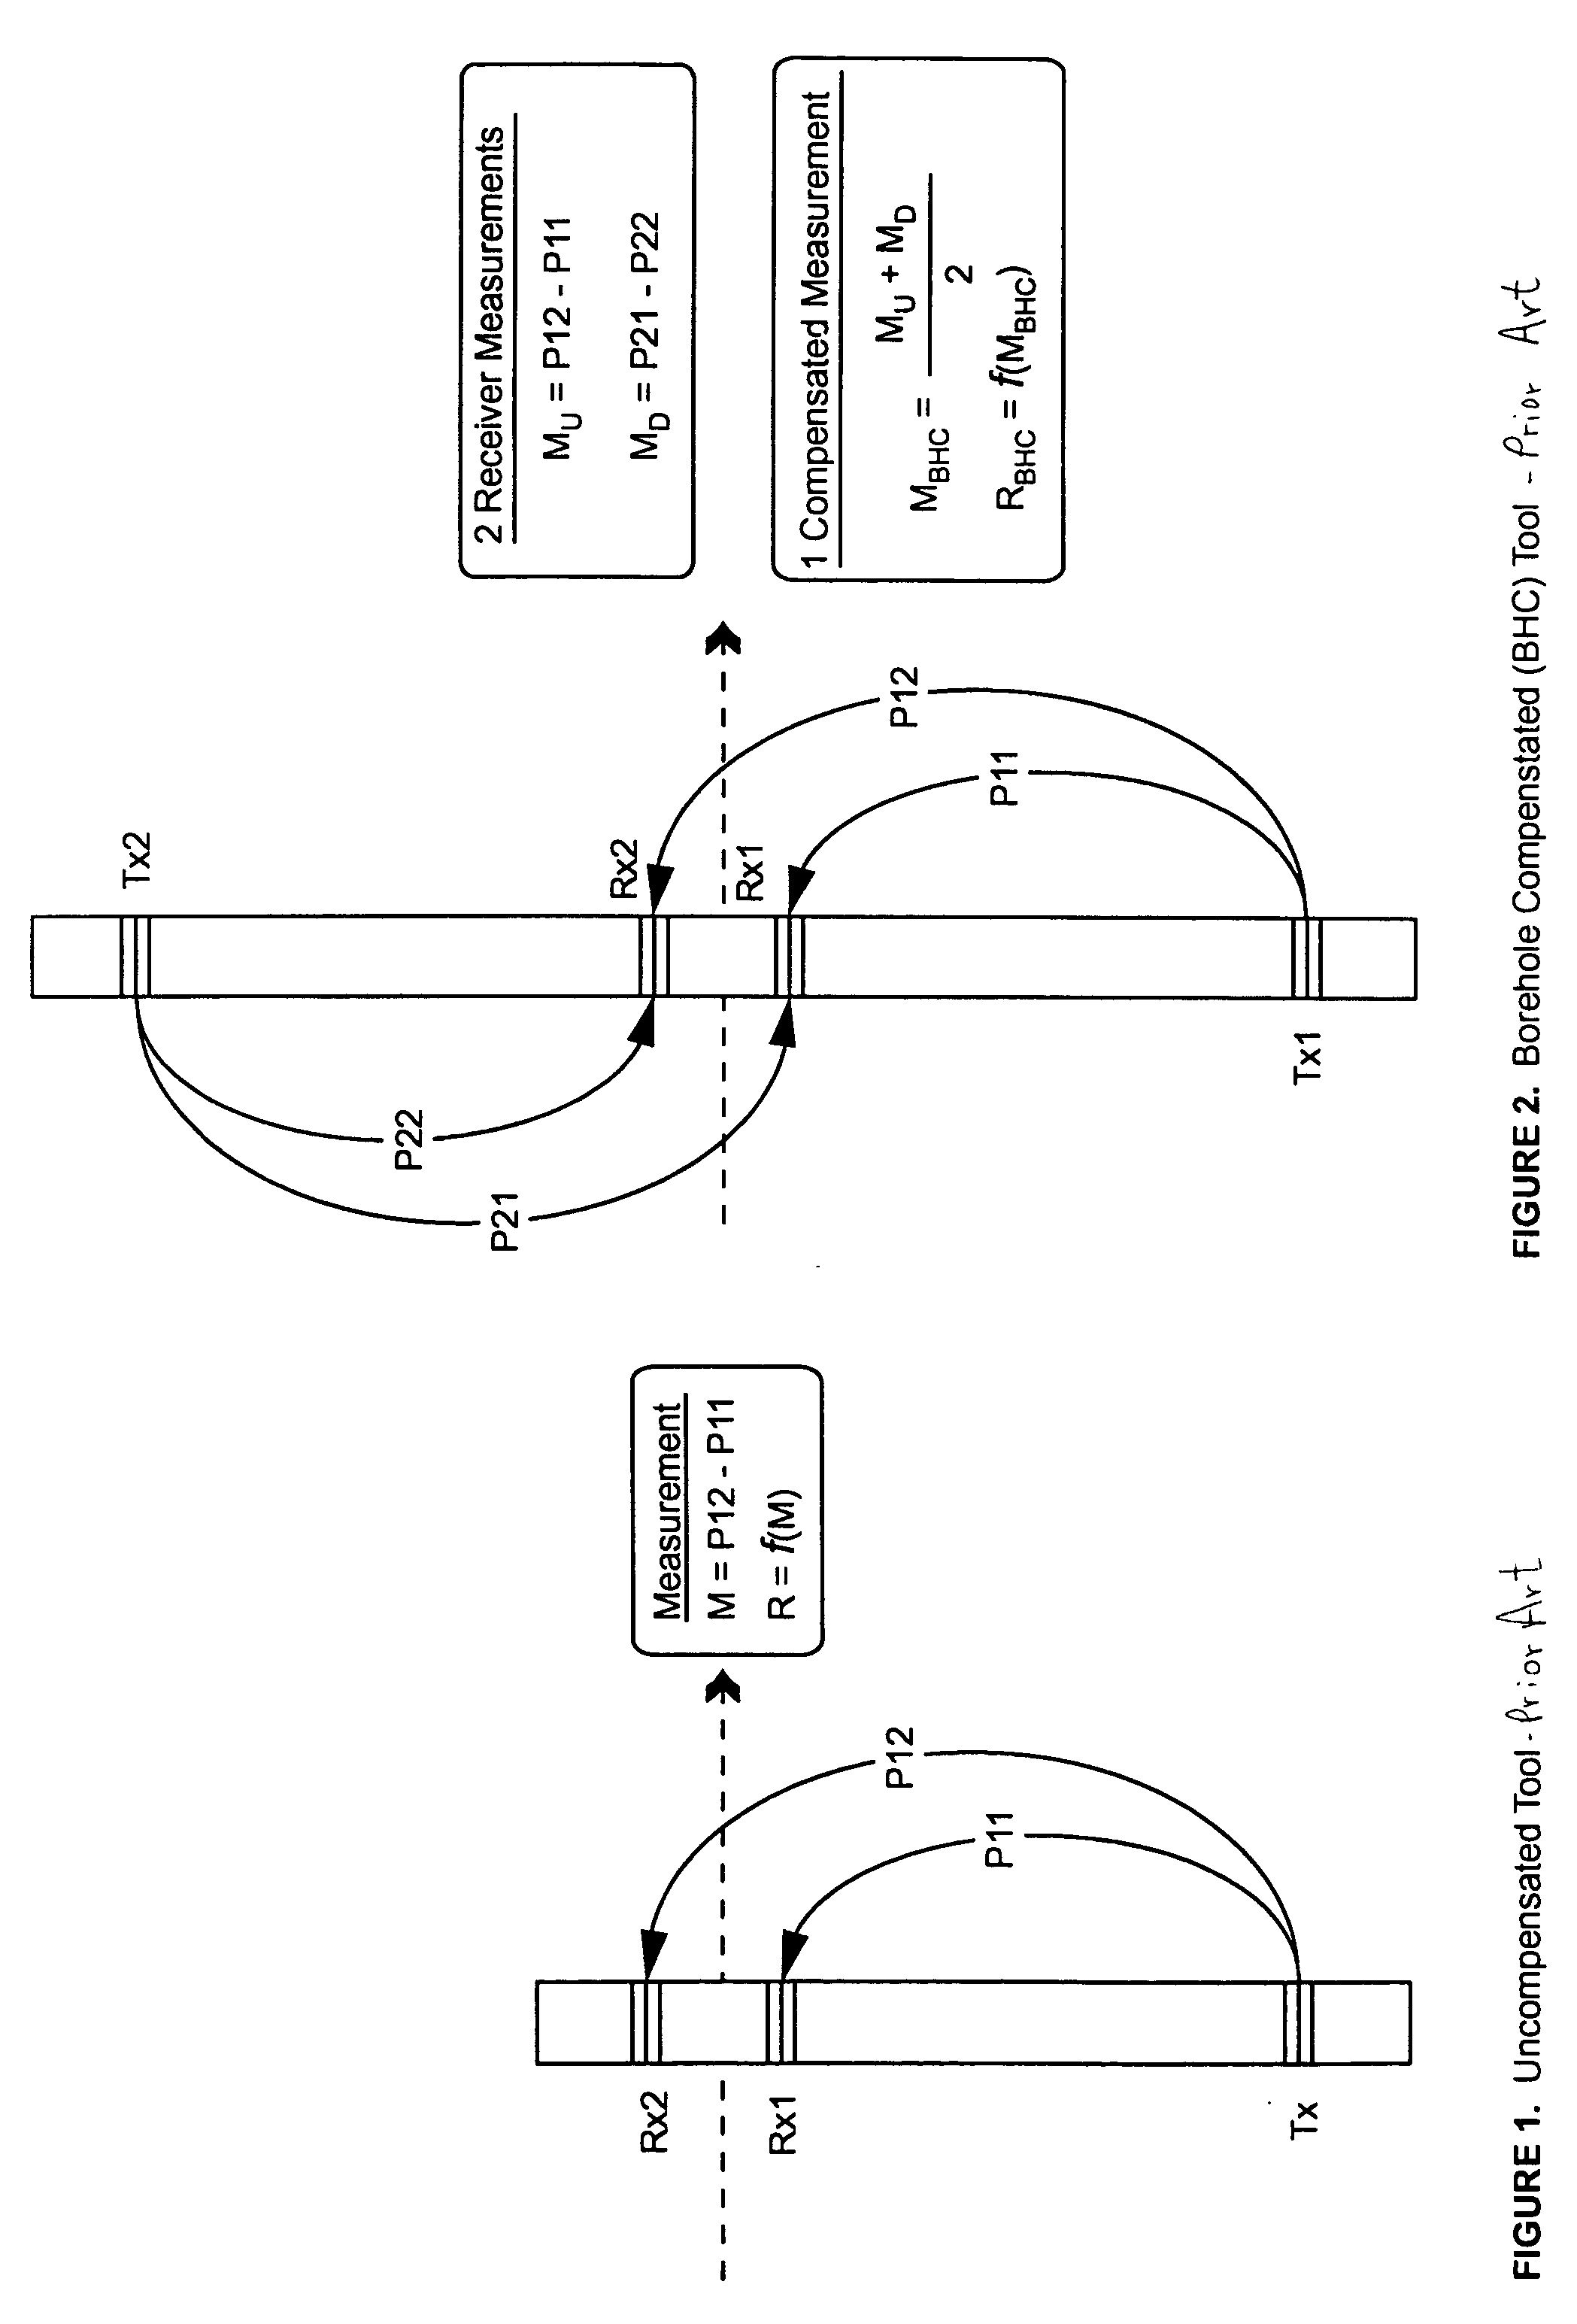 Multiple transmitter and receiver well logging device with error calibration system